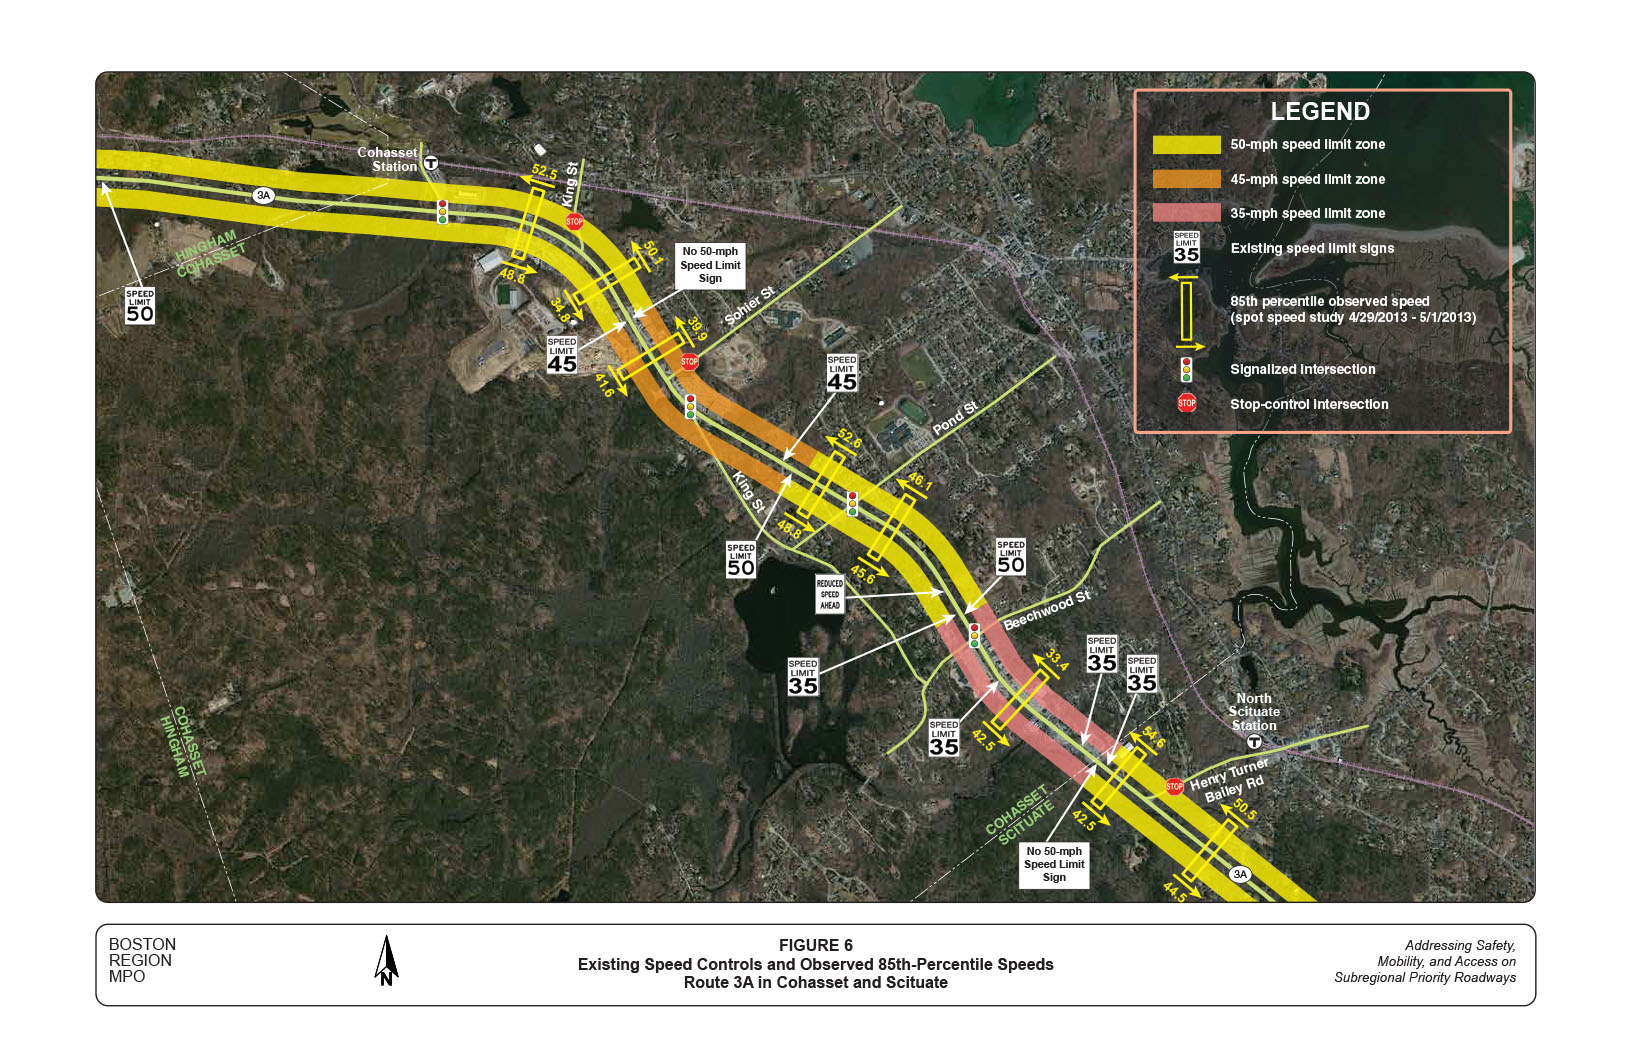 Figure 6 is an aerial view map that depicts the existing speed controls and observed 85th percentile travel speeds in the study corridor.